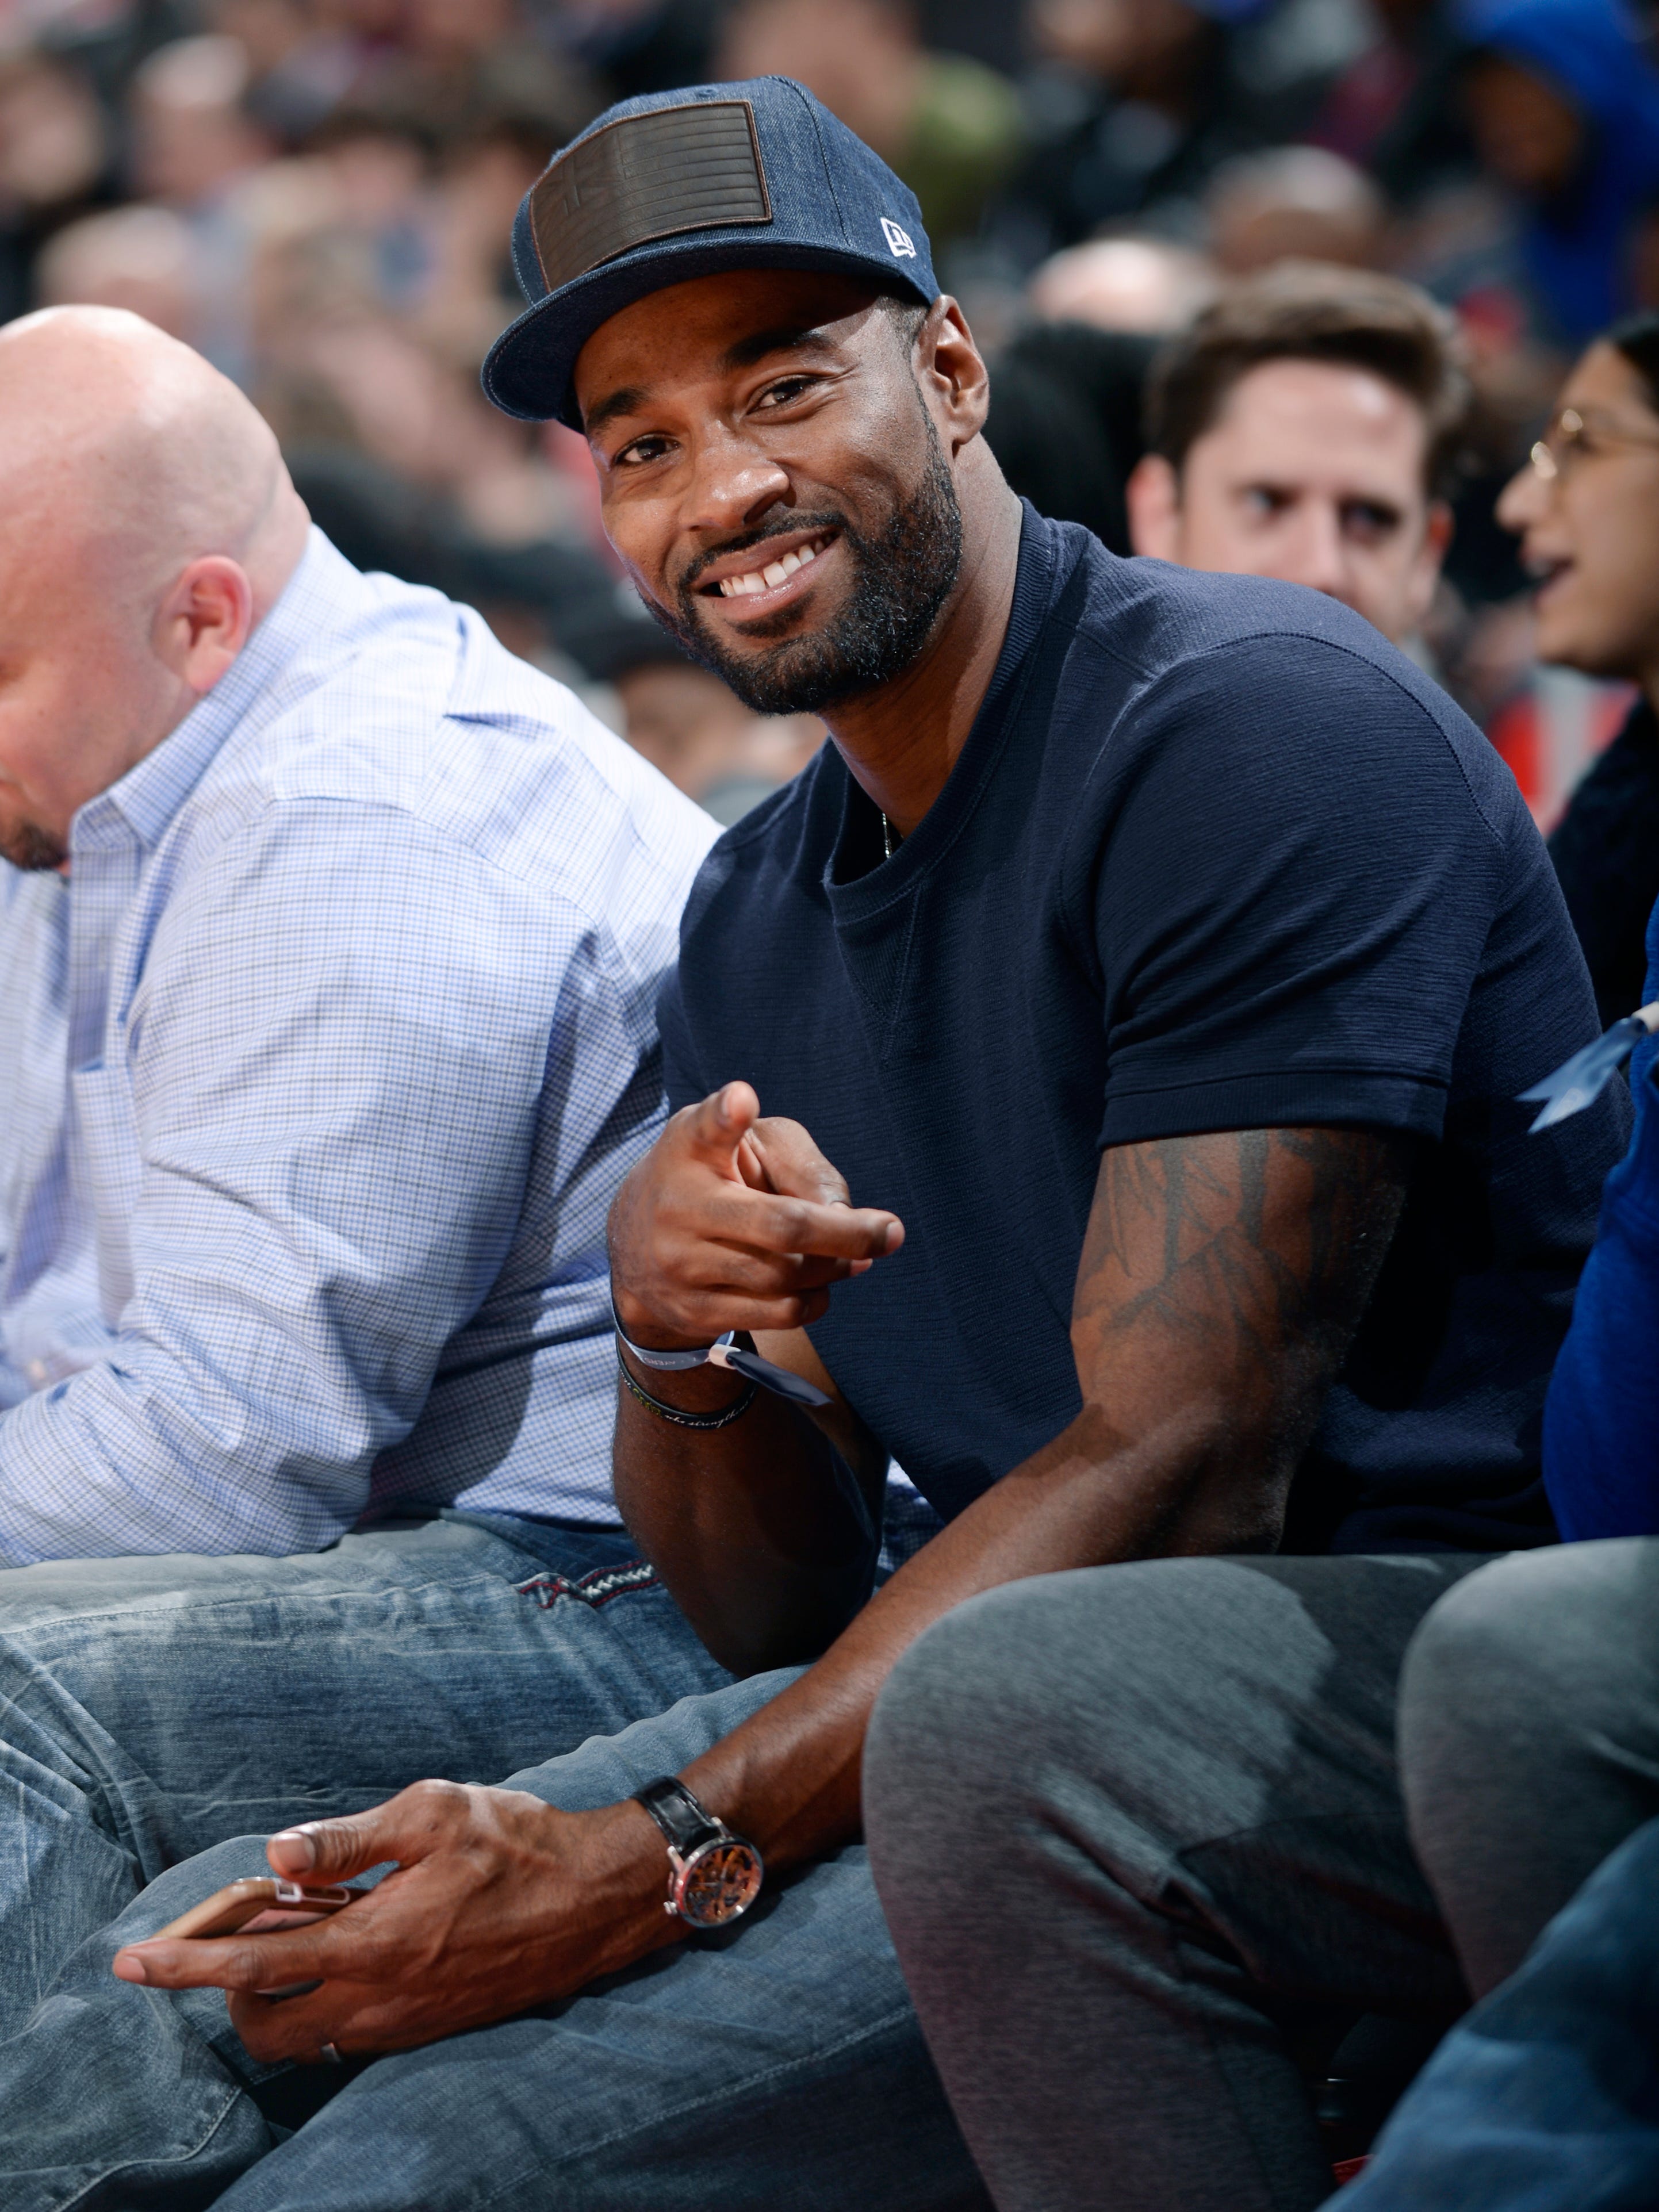 Former Lion Calvin Johnson, here at a Pistons-Cavaliers game at Little Caesars Arena, is trying to get prequalification approvals for a medical marijuana provisioning center.